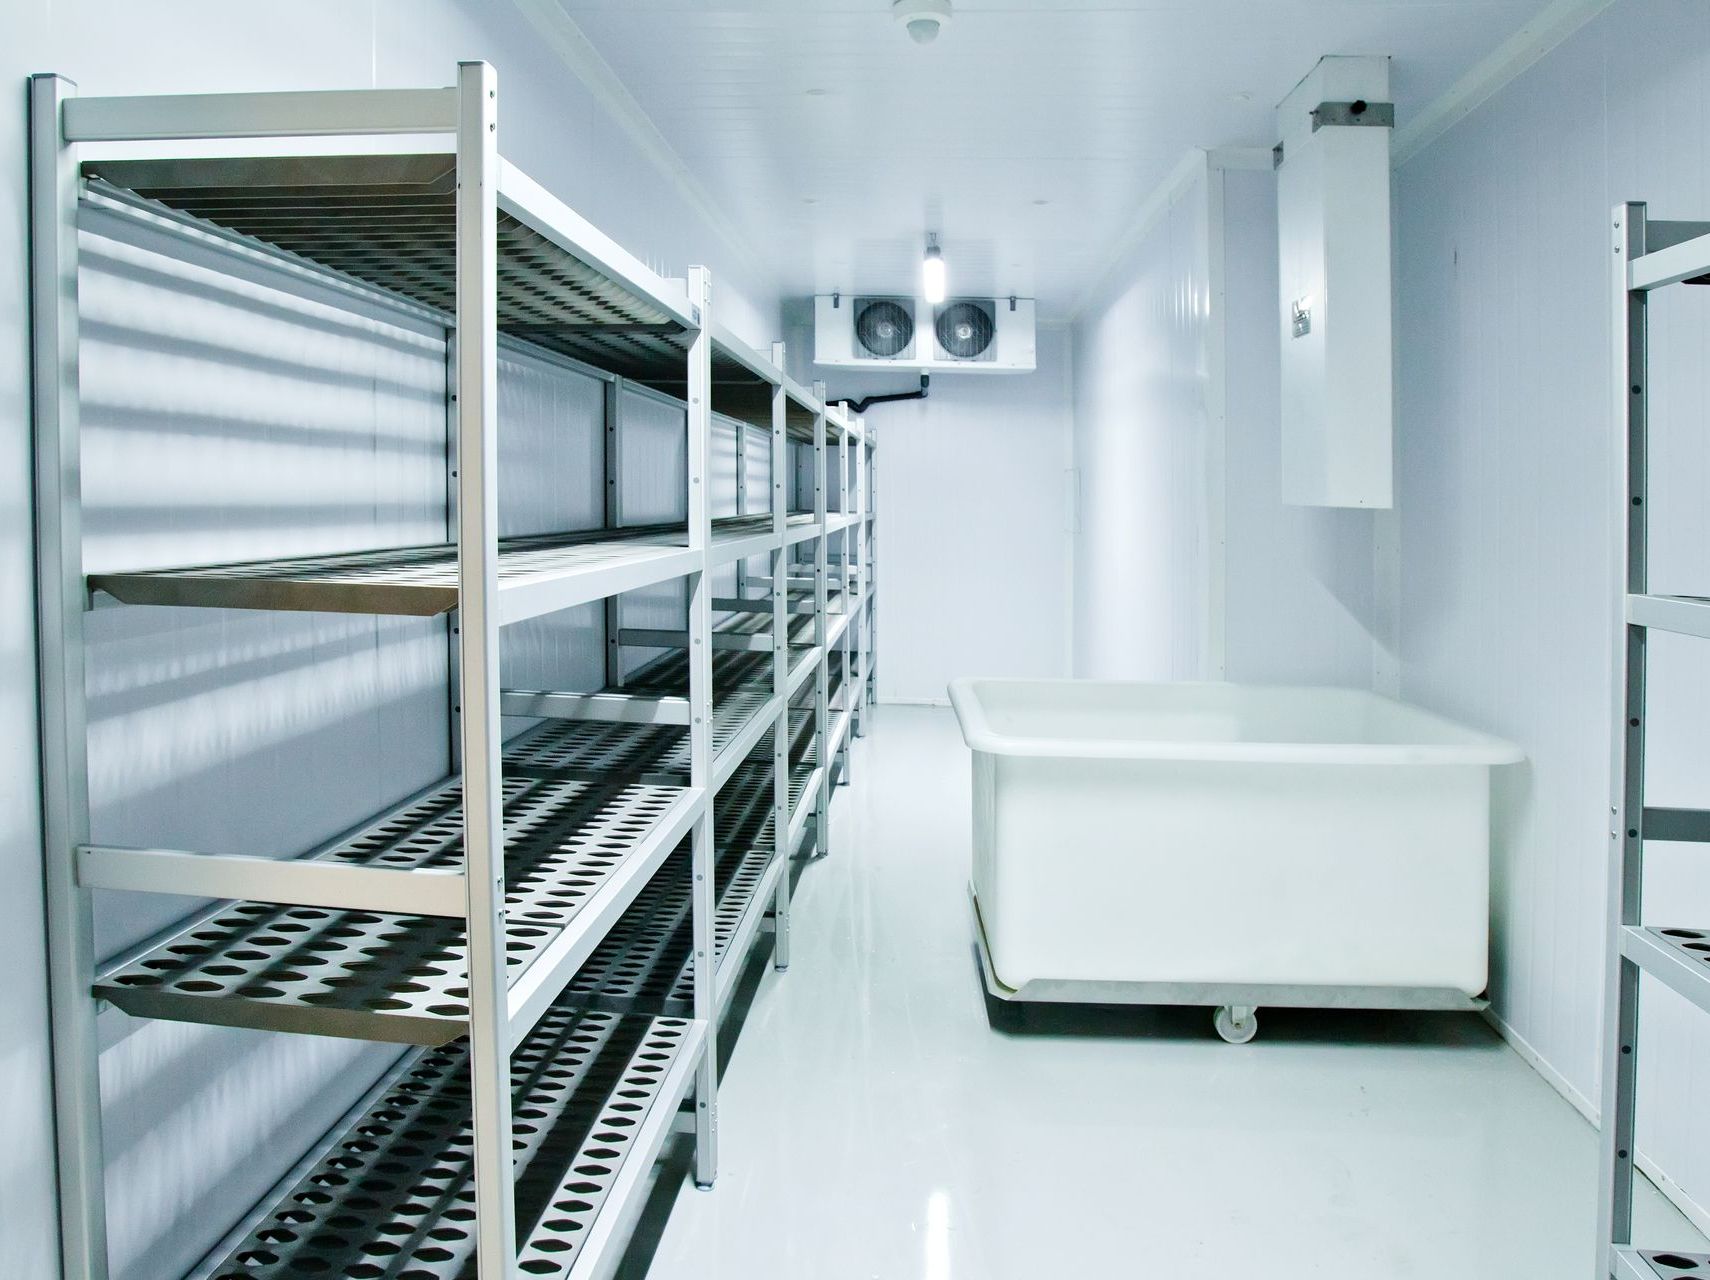 An interior view of a refrigerating chamber in a store, showcasing various refrigeration equipment, including display cases, shelves, and cooling units.